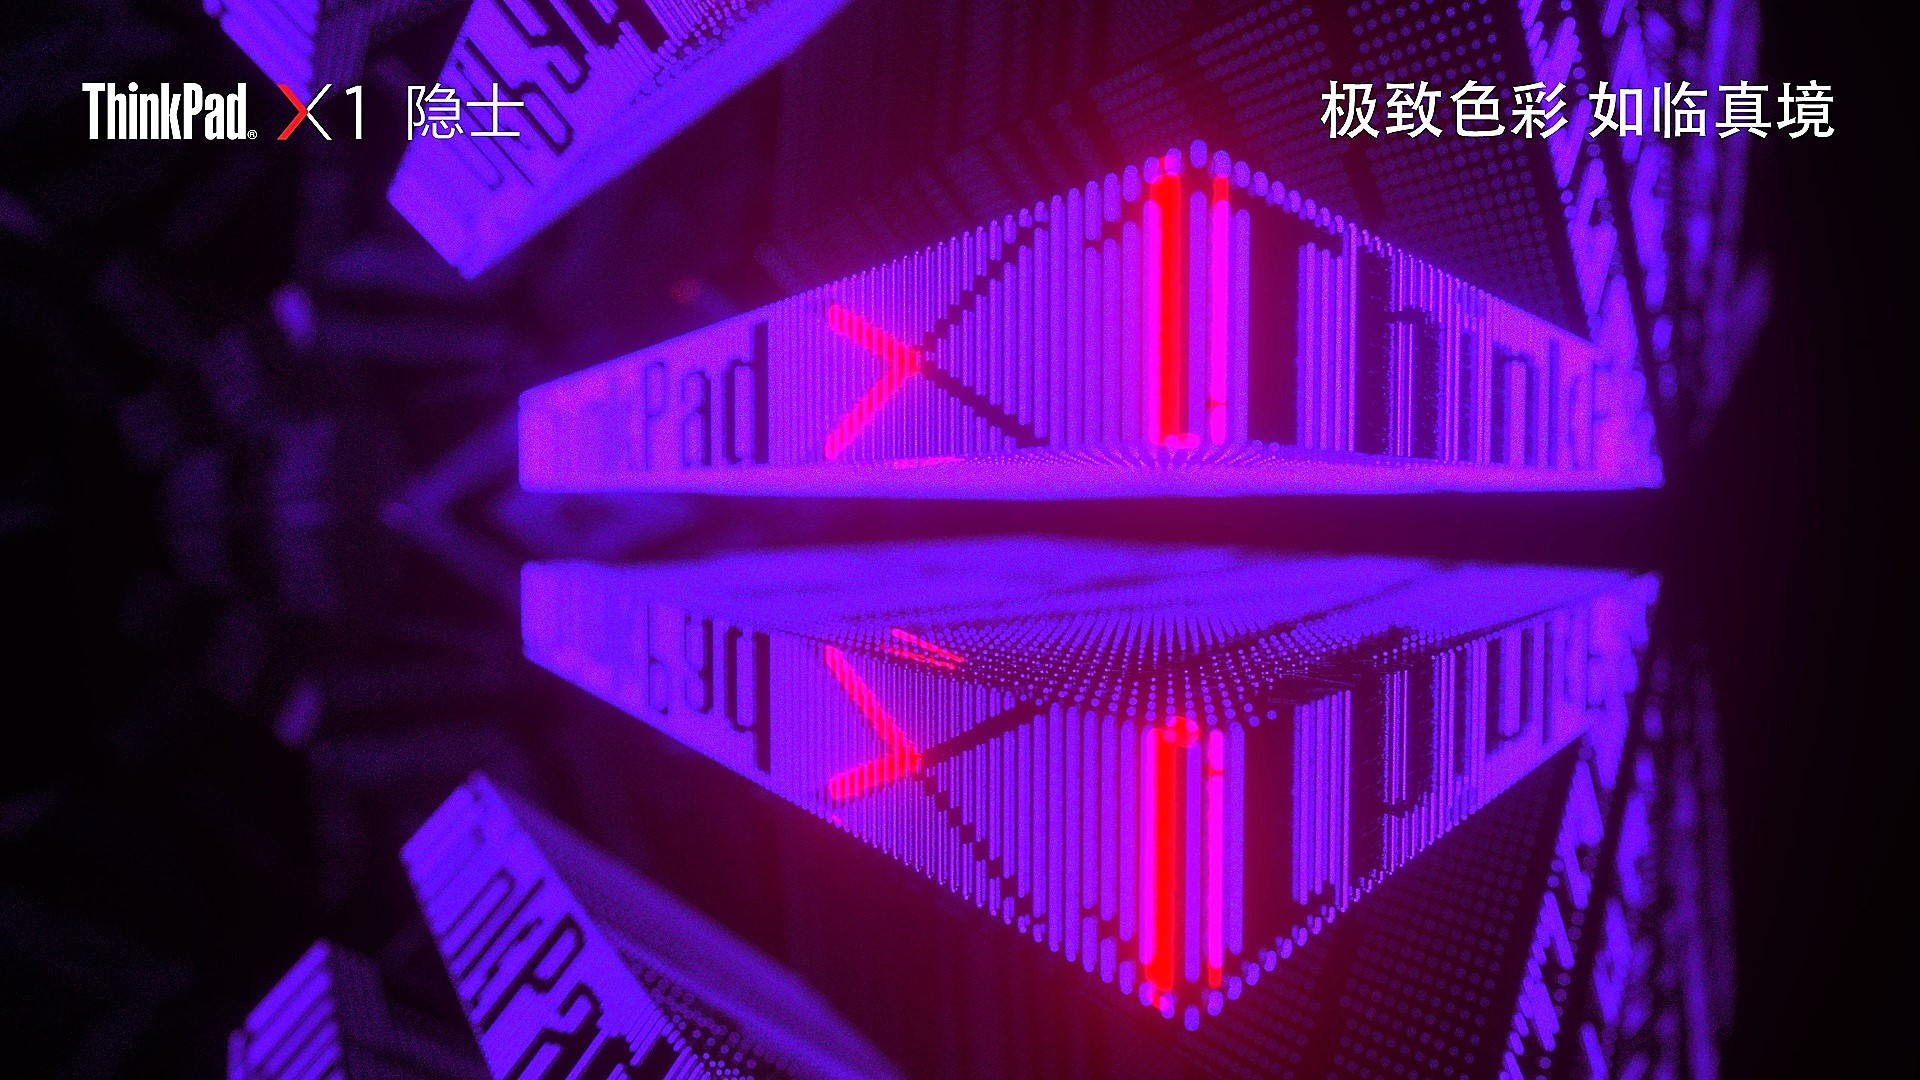 Zhonggang Zhao Lenovo Thinkpad X1 Concept And Keyframe And Animation Motion Graphics Graphic Design Art Direction